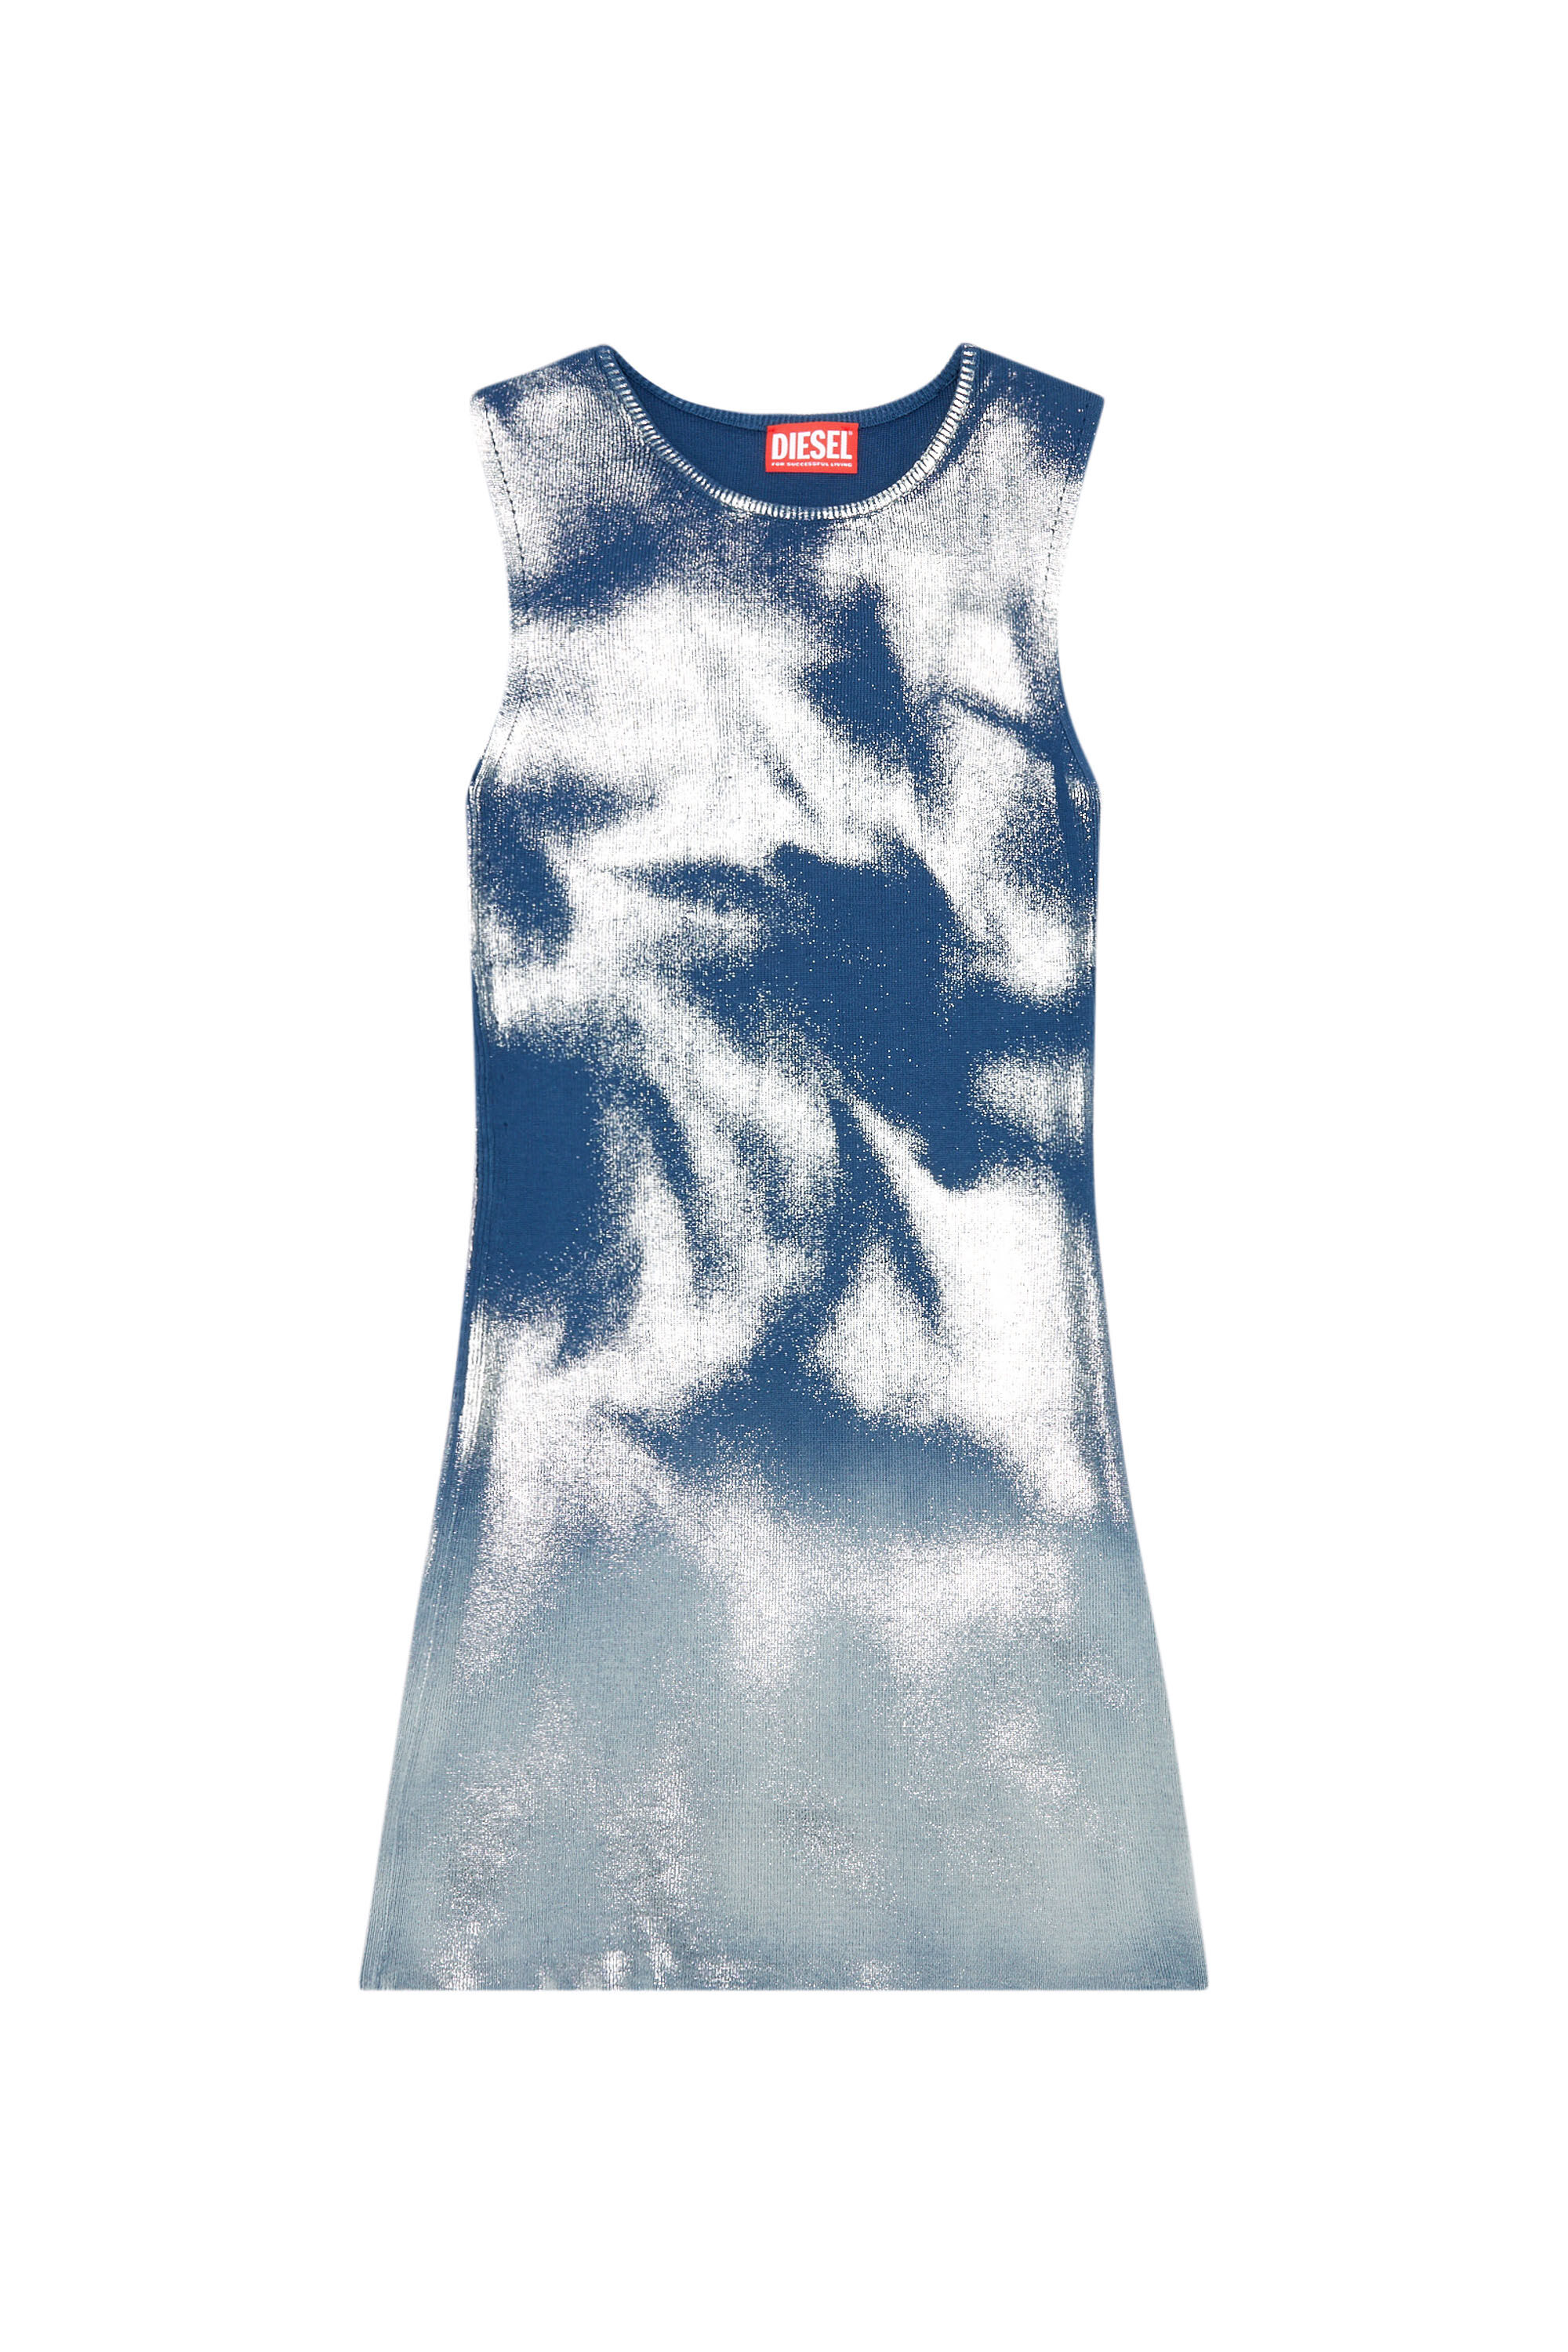 Diesel - M-IDONY, Woman Short knit dress with metallic effects in Blue - Image 2